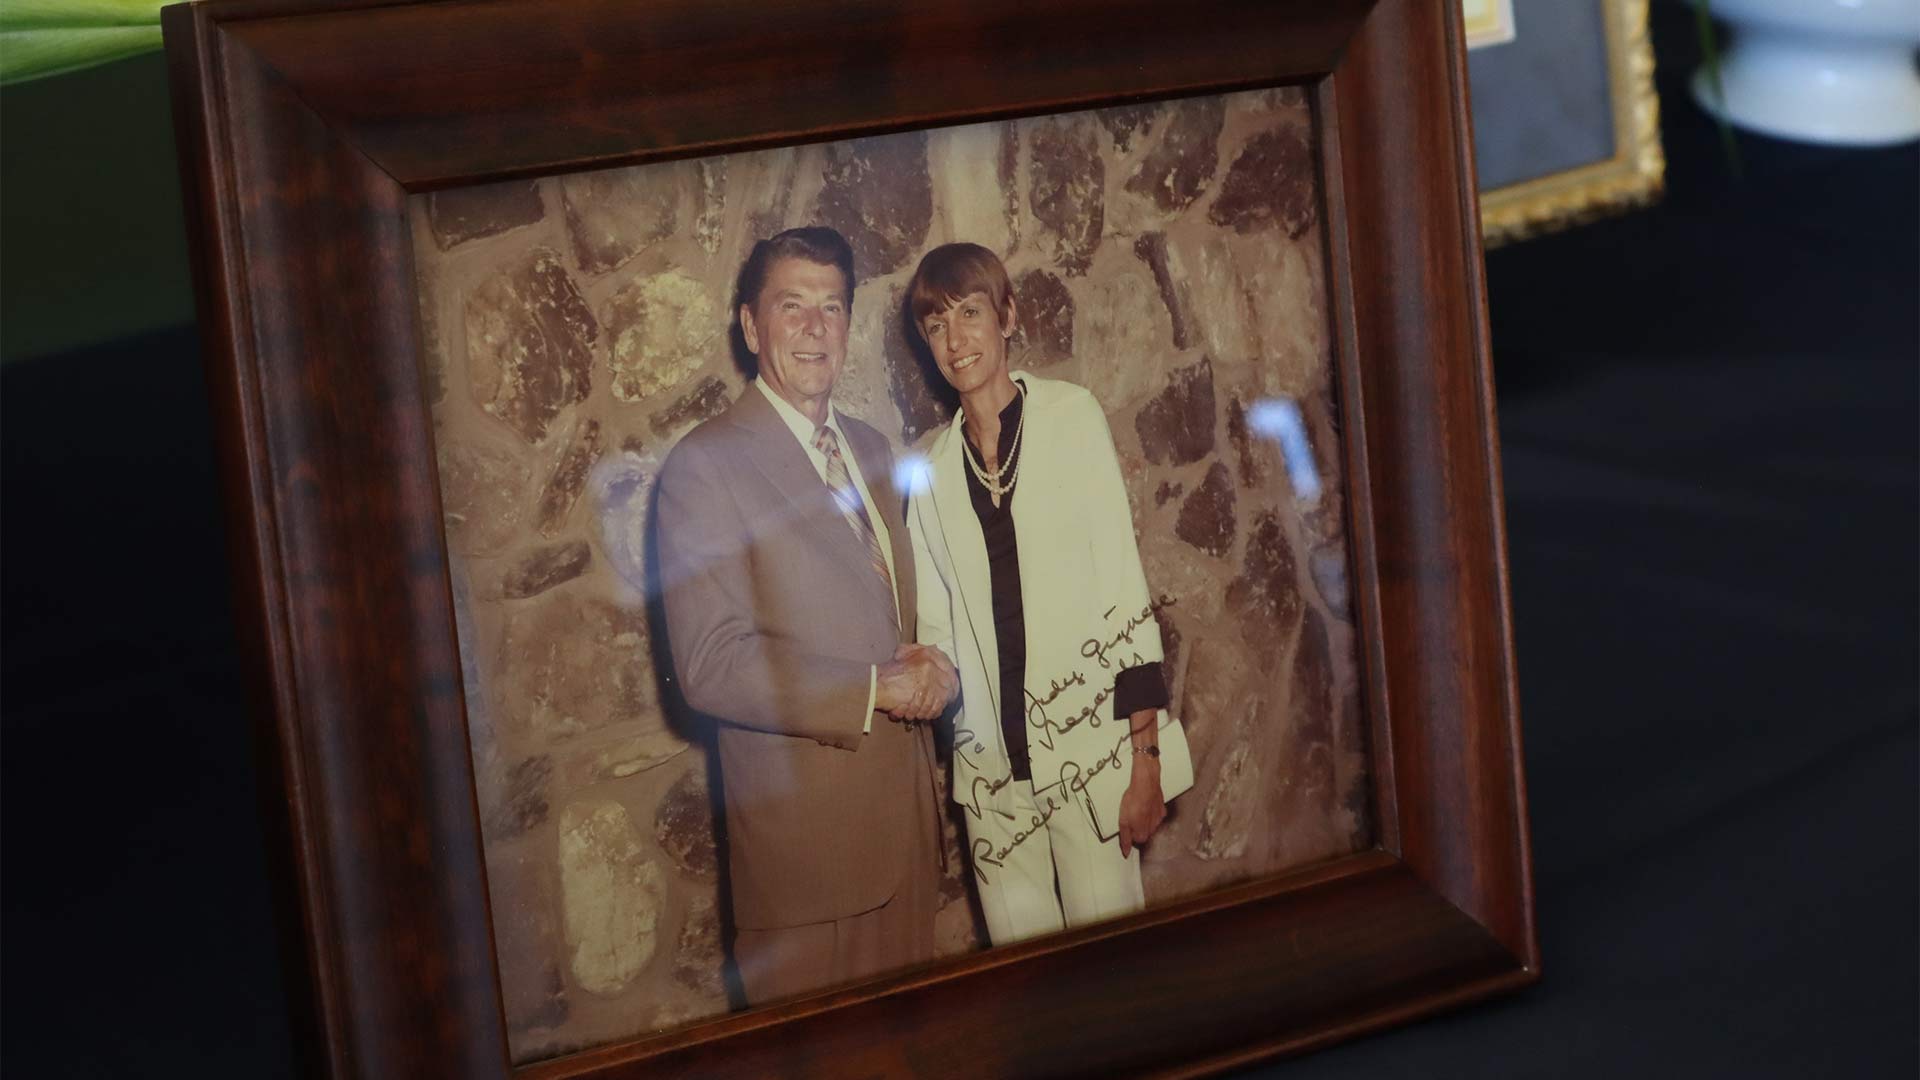 A Celebration of Life was held for former Cochise County Supervisor Judy Gignac, who was the first woman elected to the board from 1977-1988. A photo of Gignac (left) with President Ronald Reagan (right) was displayed for attendees during the event. January 9, 2024.